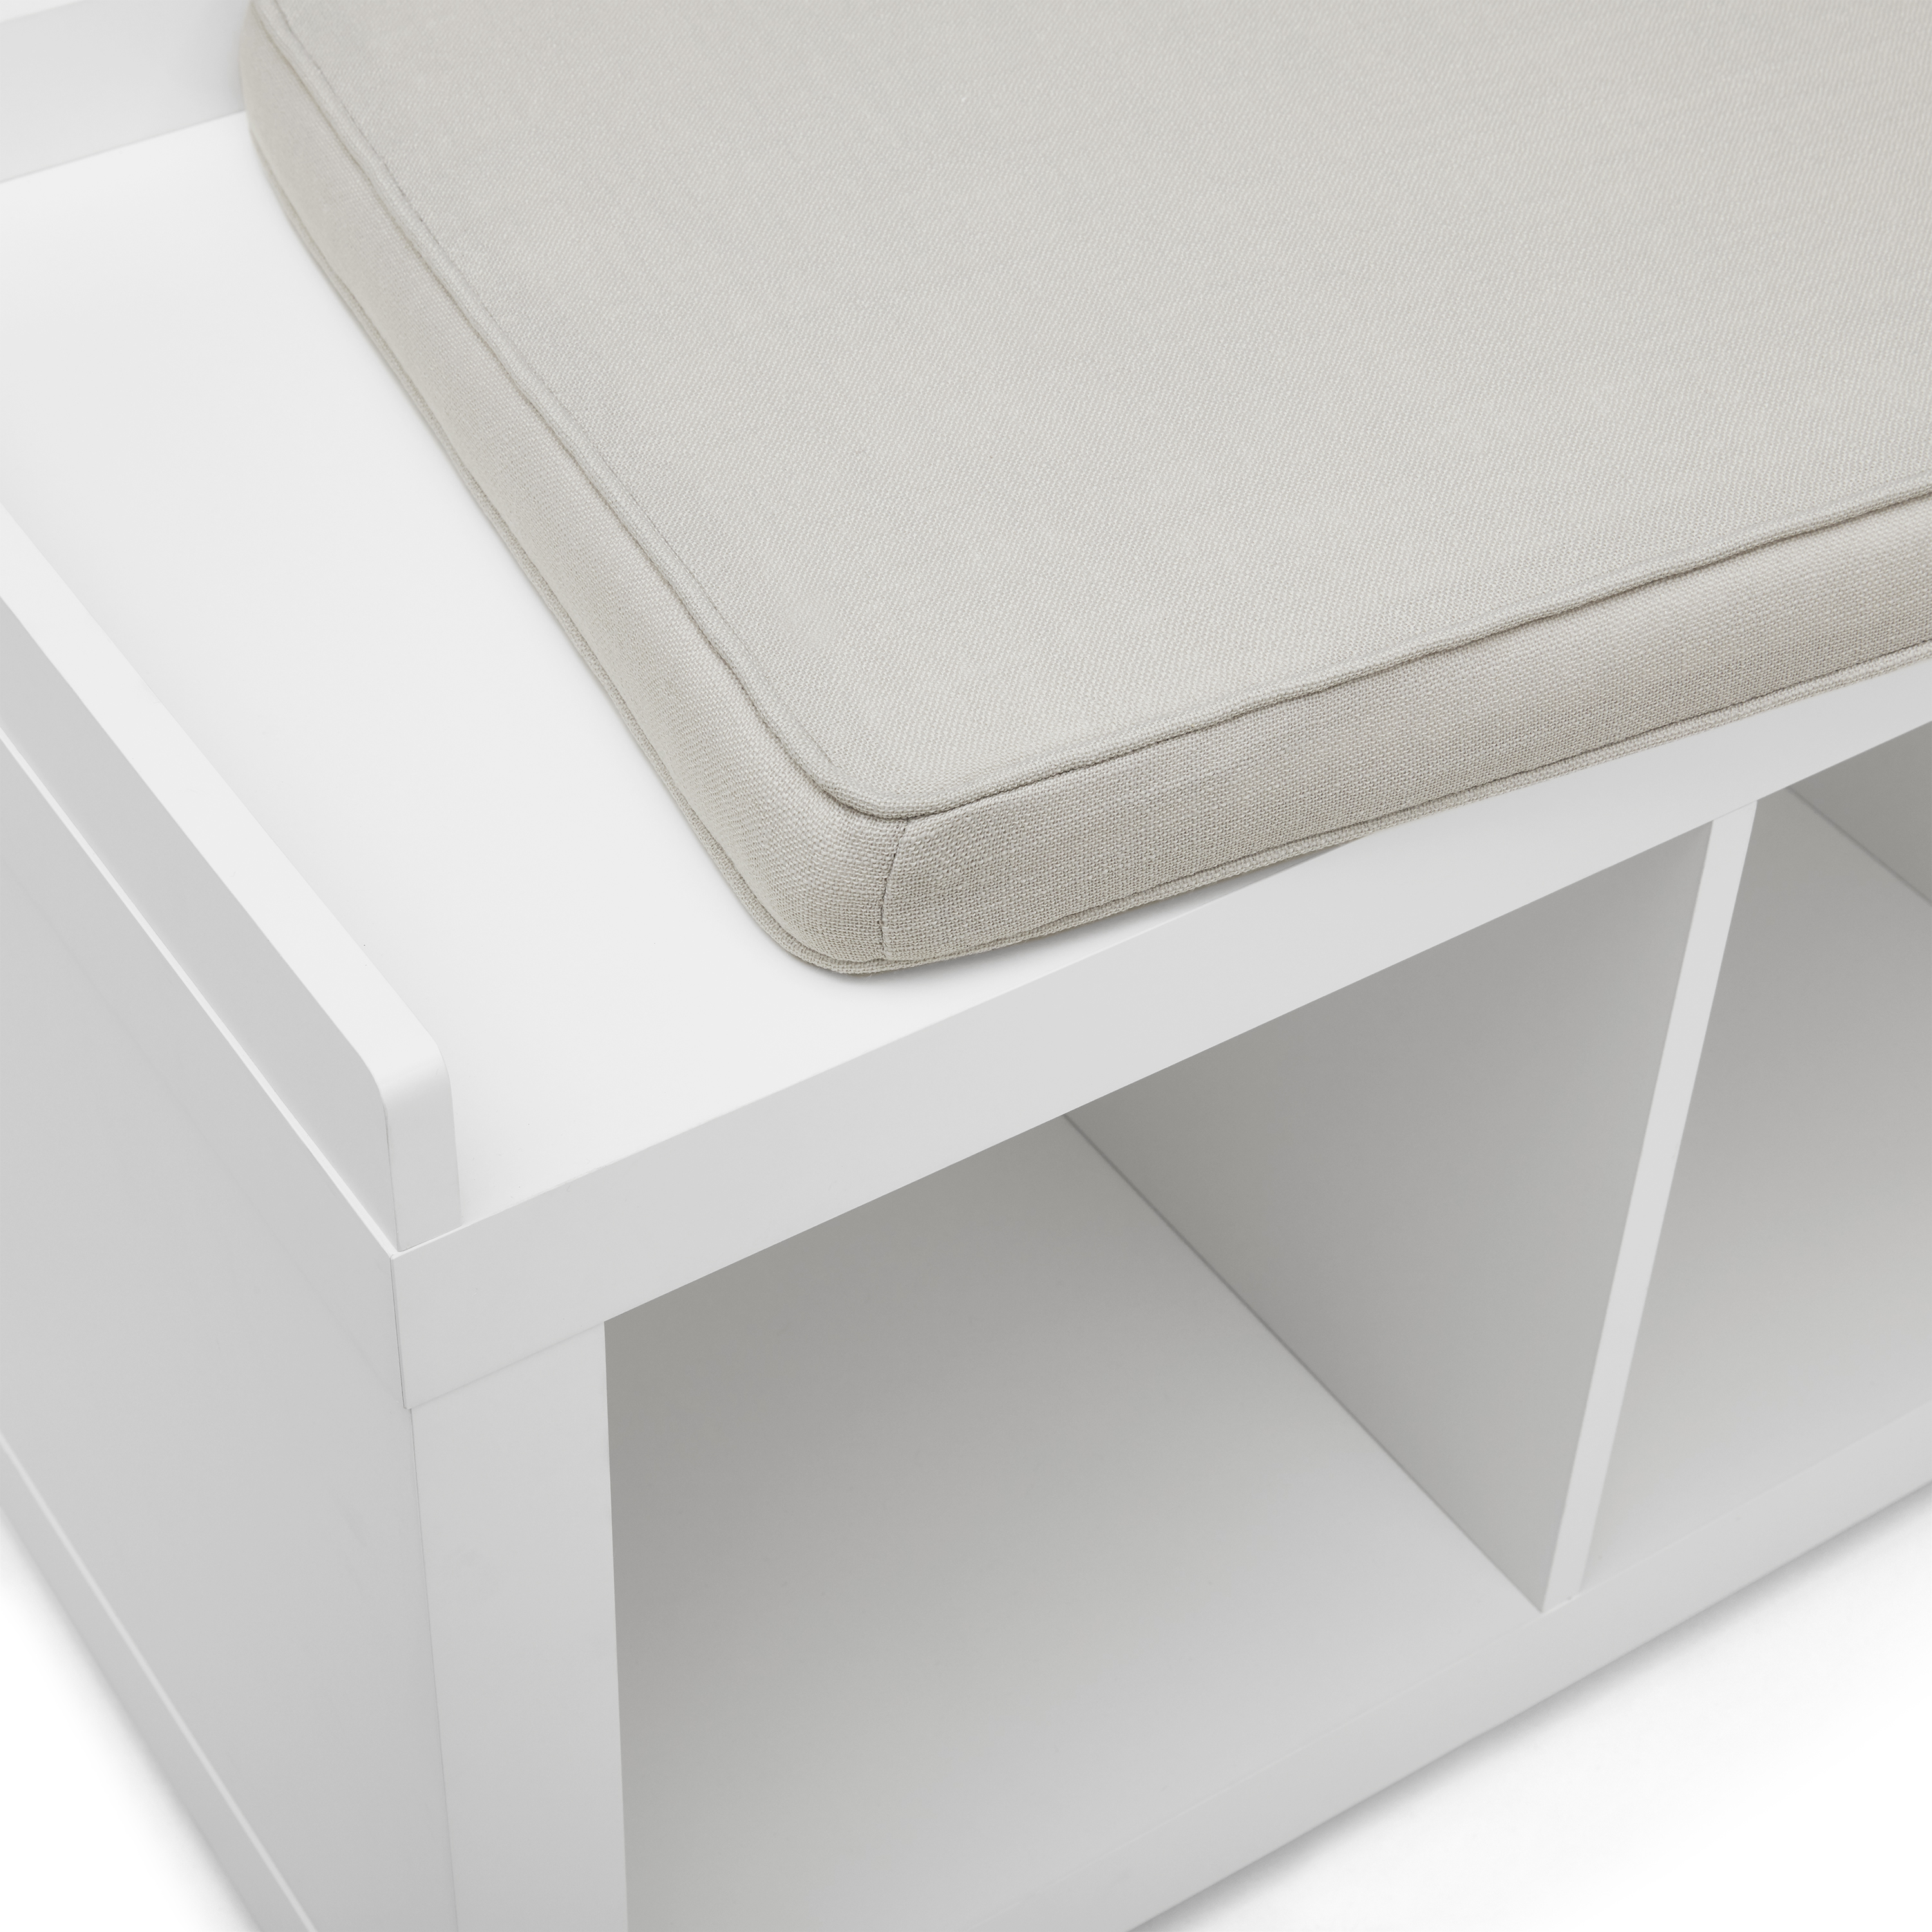 Better Homes & Gardens 4-Cube Shoe Storage Bench, White - image 3 of 6